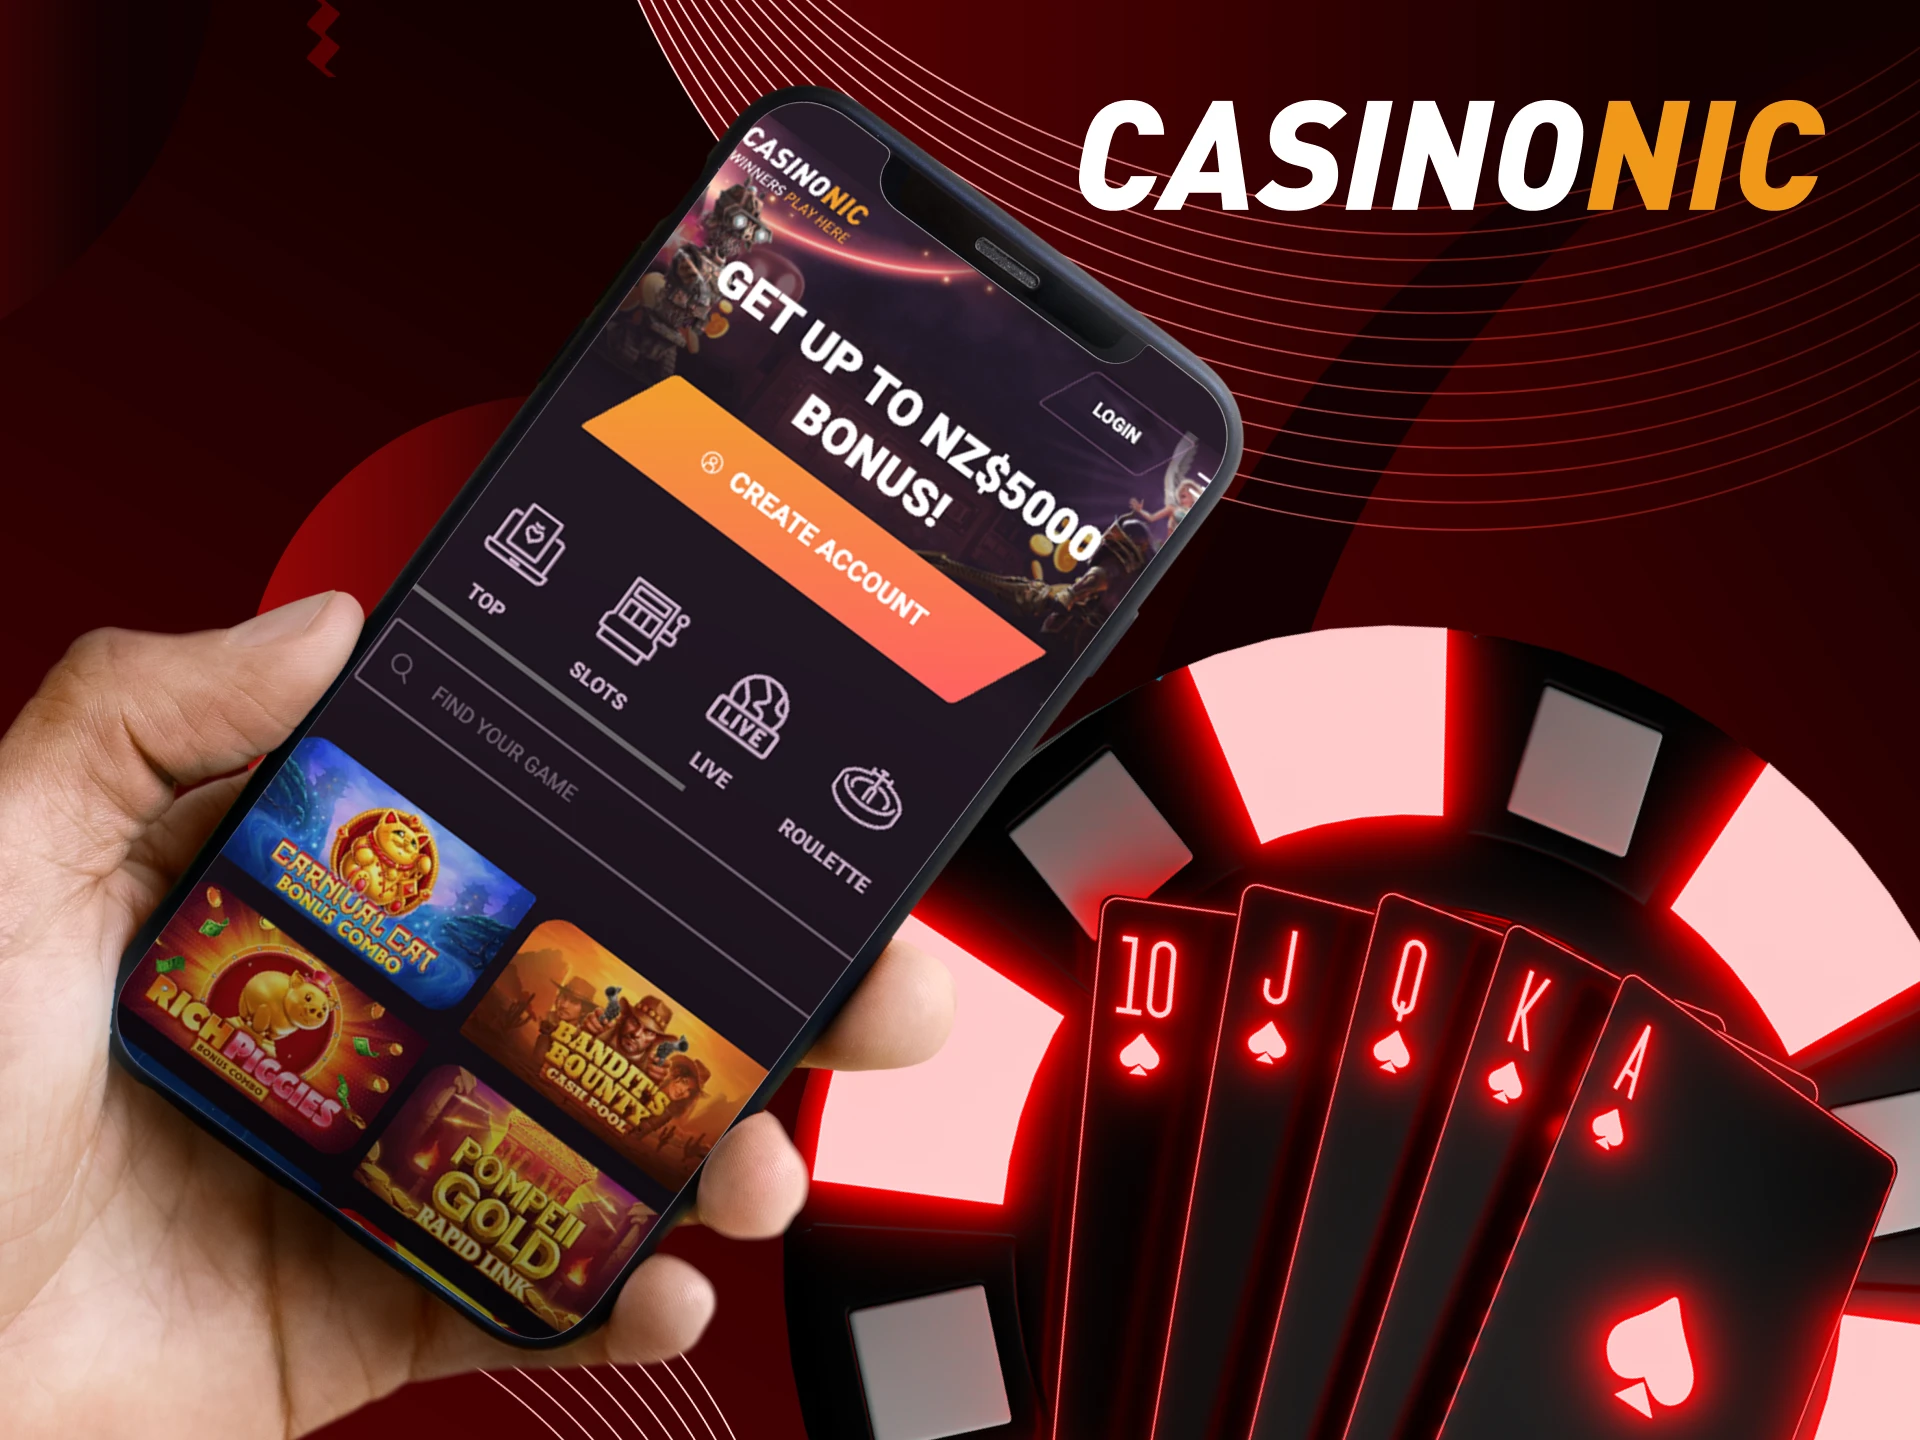 What are the features of the CasinoNic online casino mobile application.